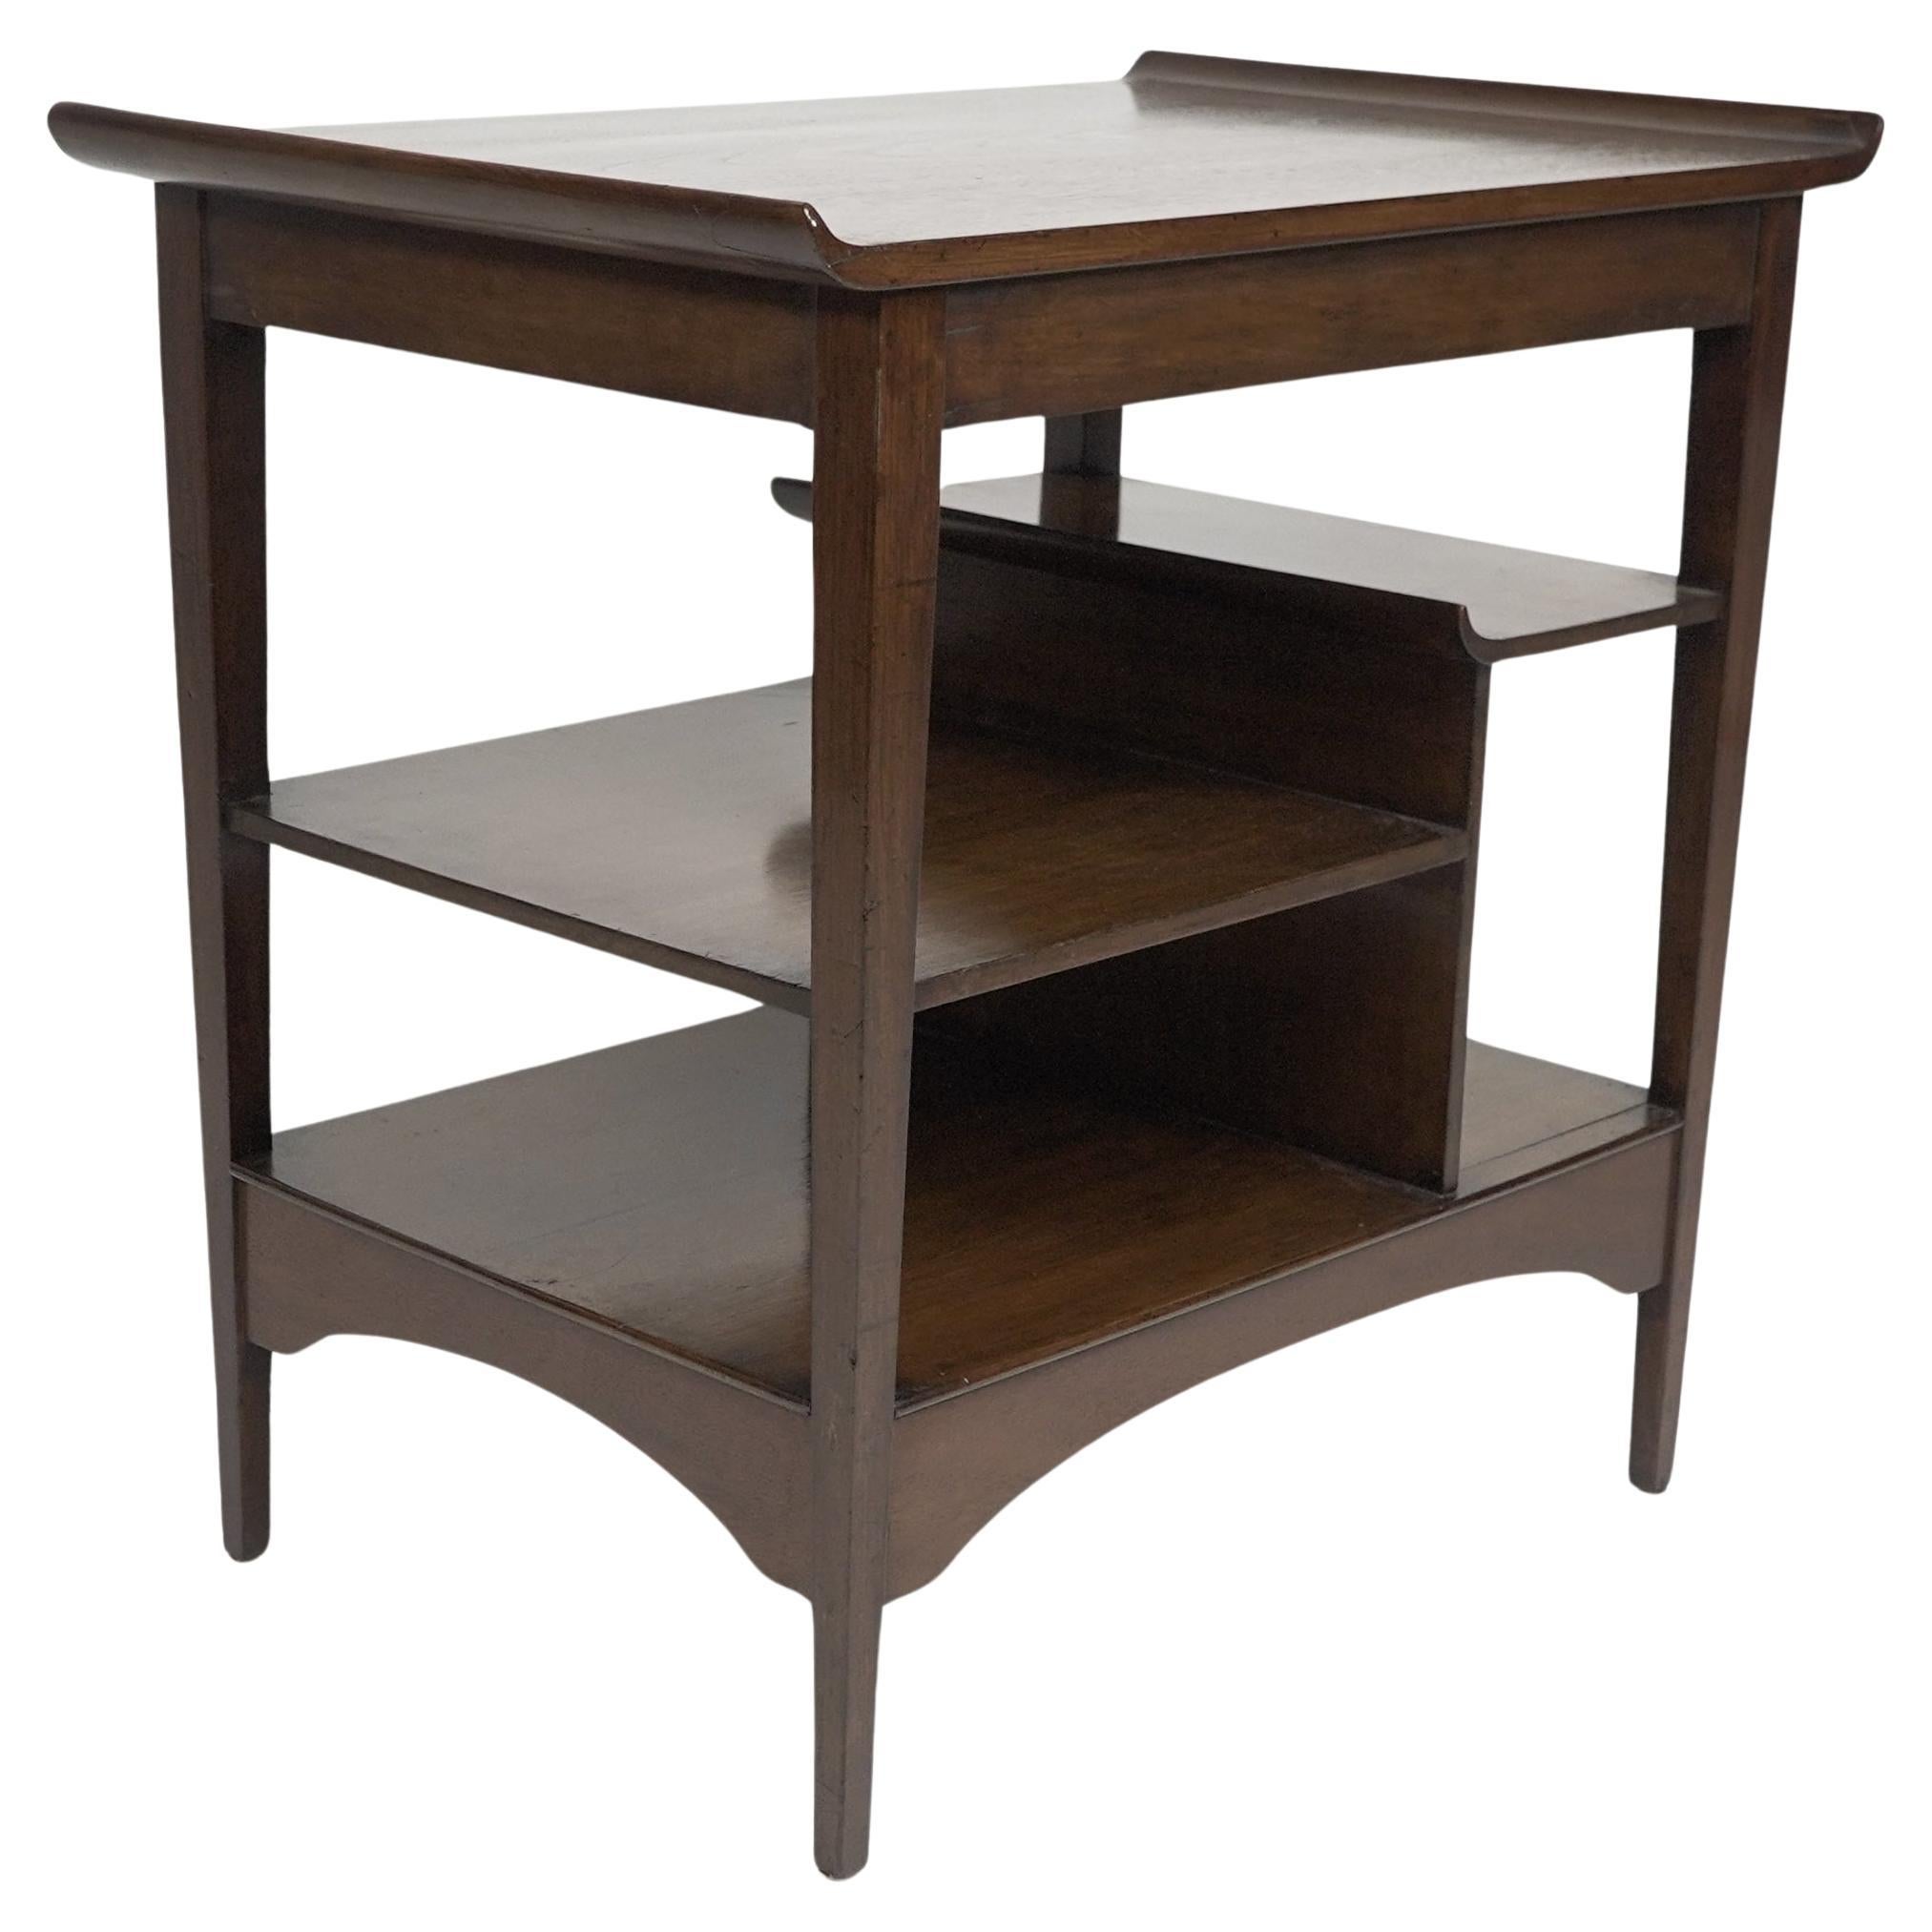 An Aesthetic Movement Walnut side table with Torii gate style curving uprights.